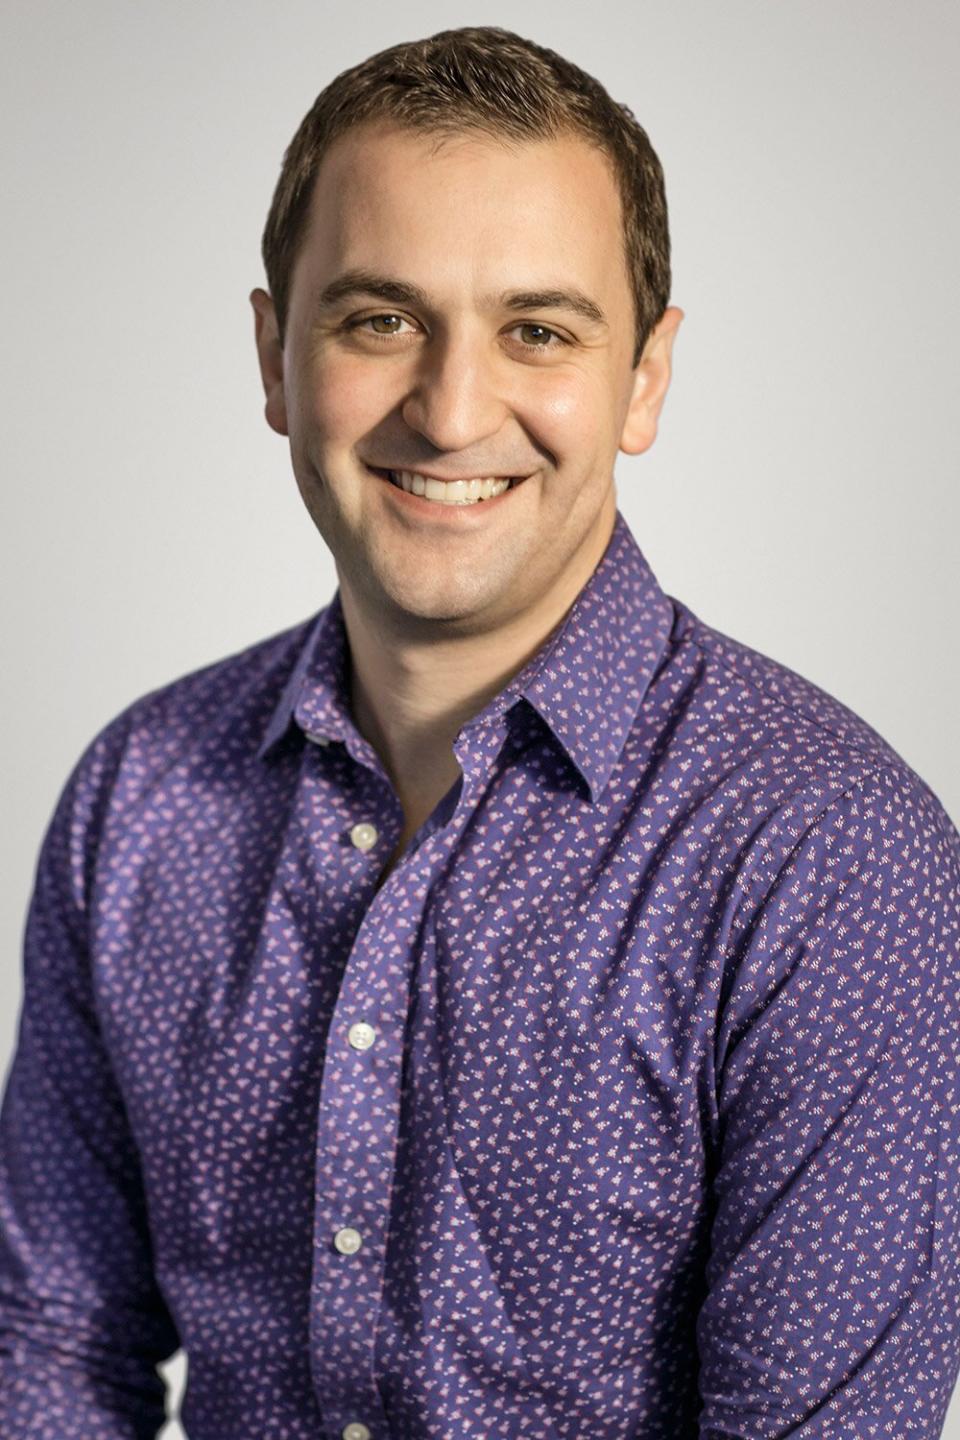 How Lyft CEO John Zimmer Faced His Depression and Why He Wants to Remove the Stigma of Mental Illness